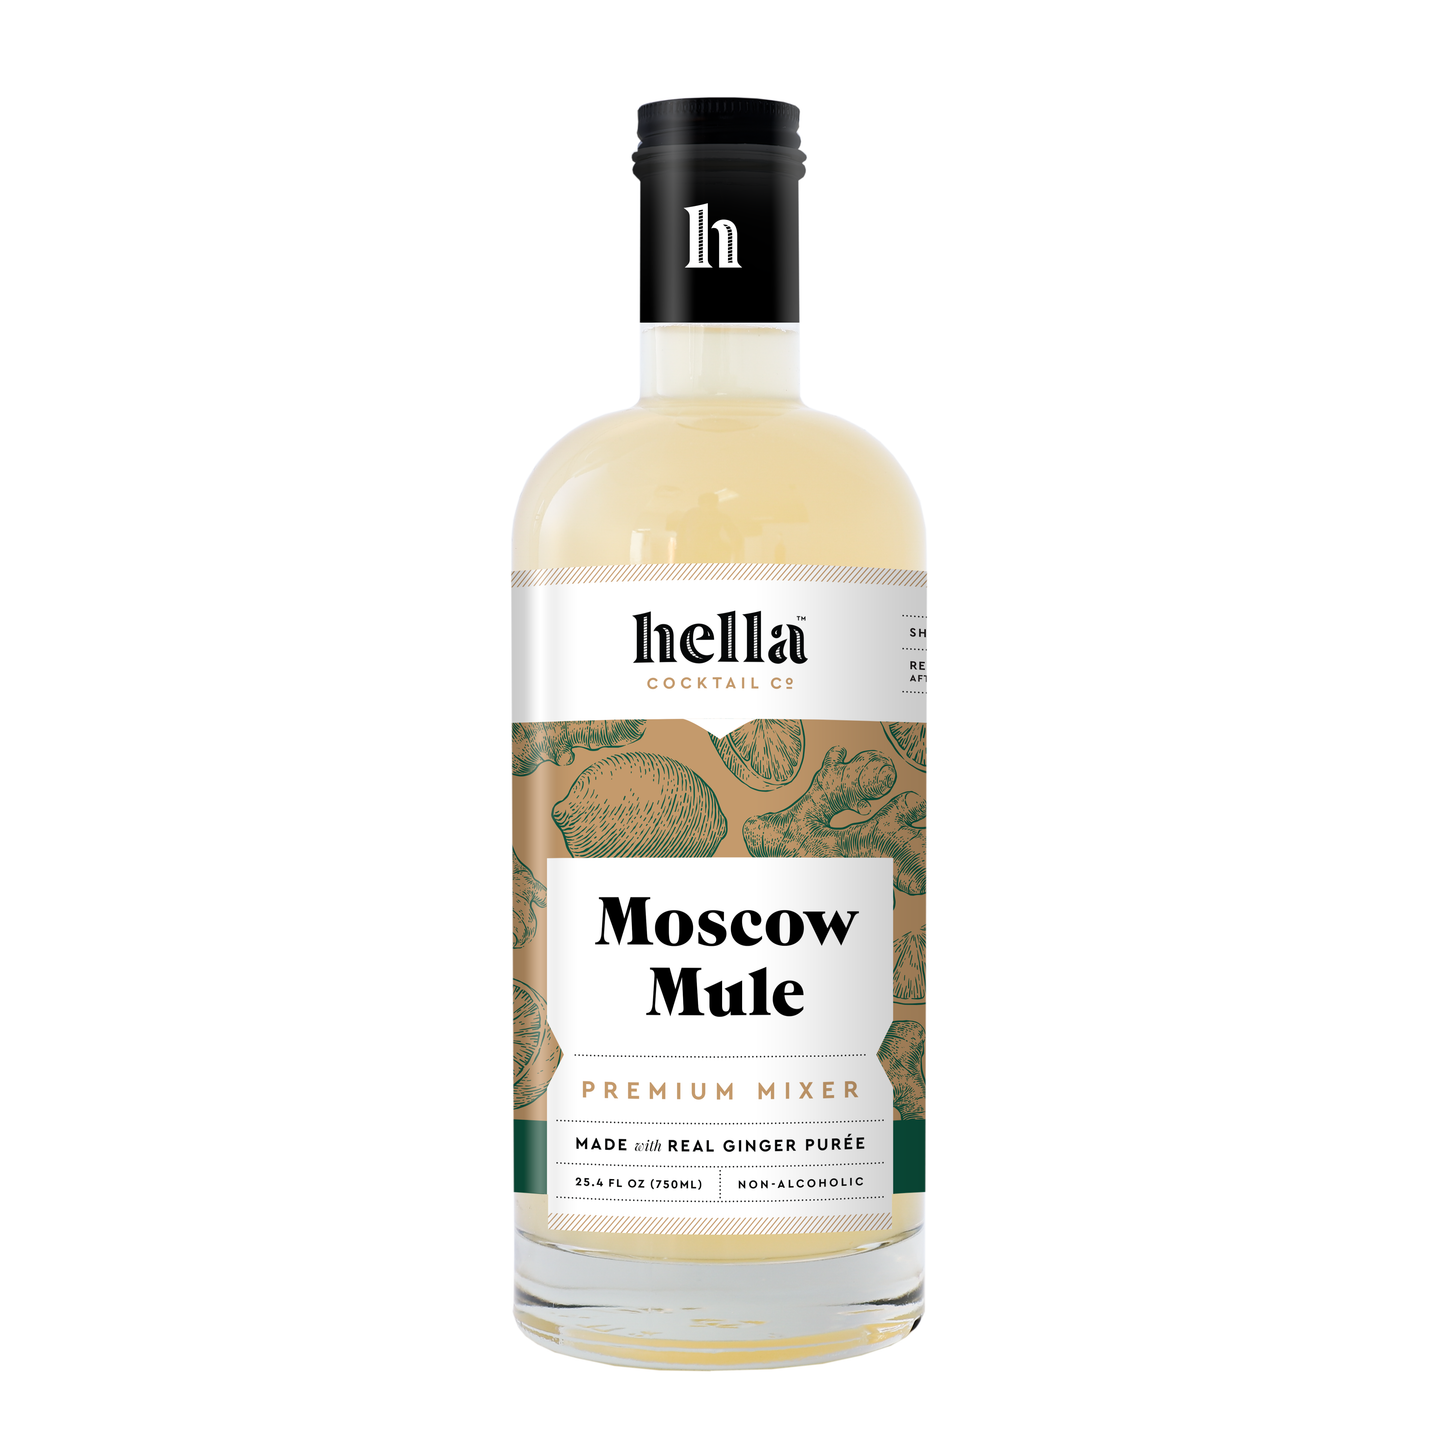 Hella Cocktail Co. - Cocktail Mixer: Moscow Mule, 750 ml (Certified Non-GMO)